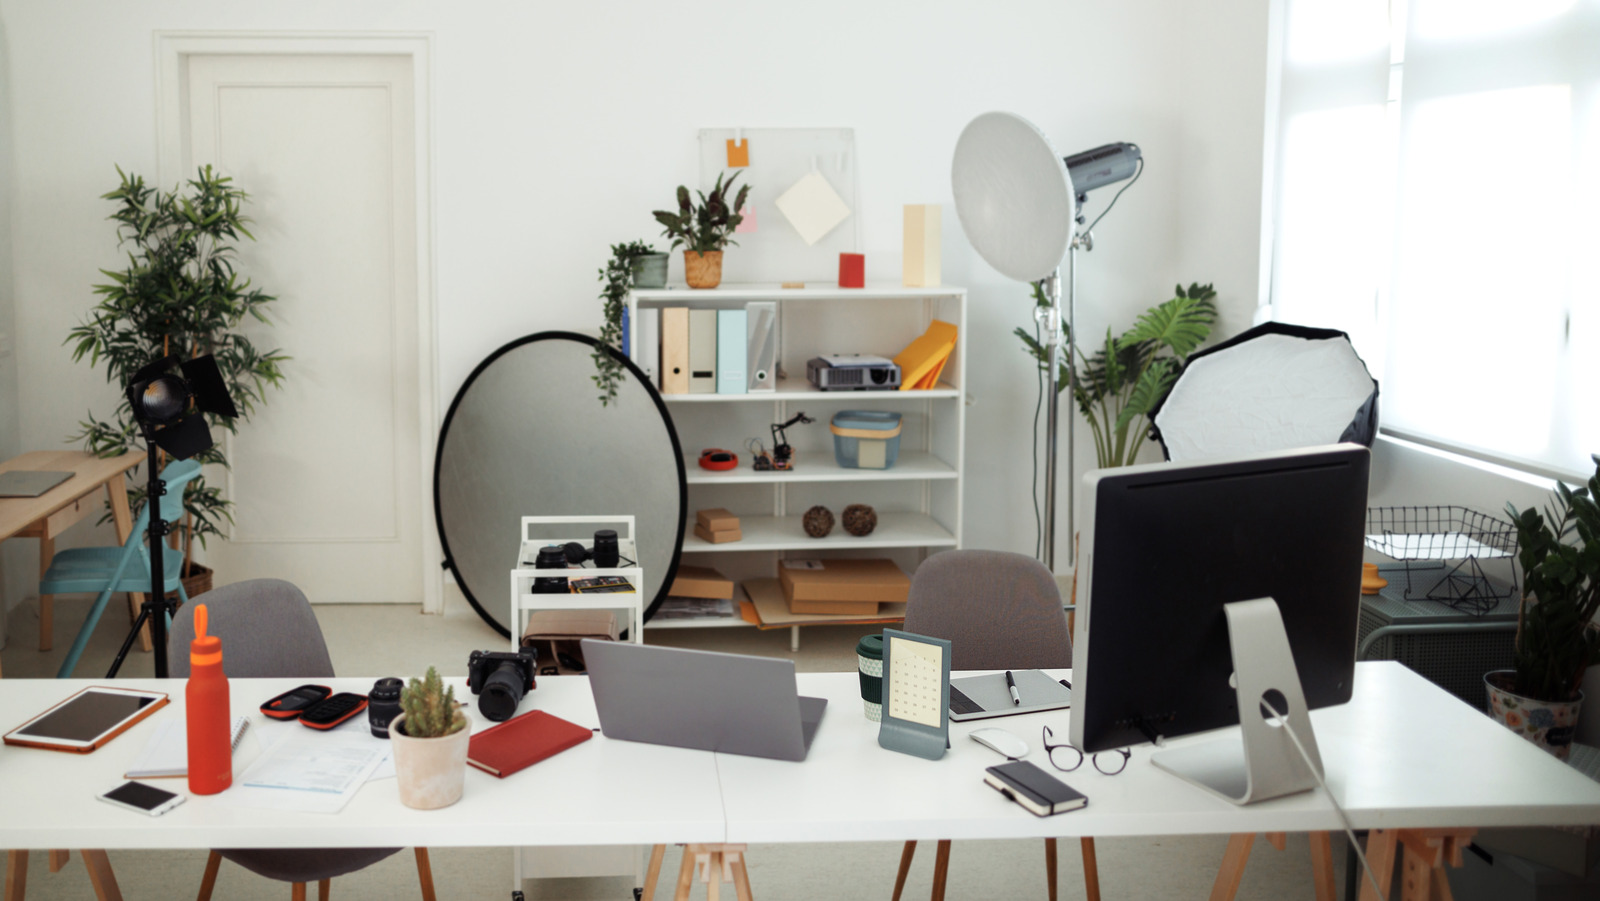 7 Gadgets For Home Office That Will Increase Your Productivity